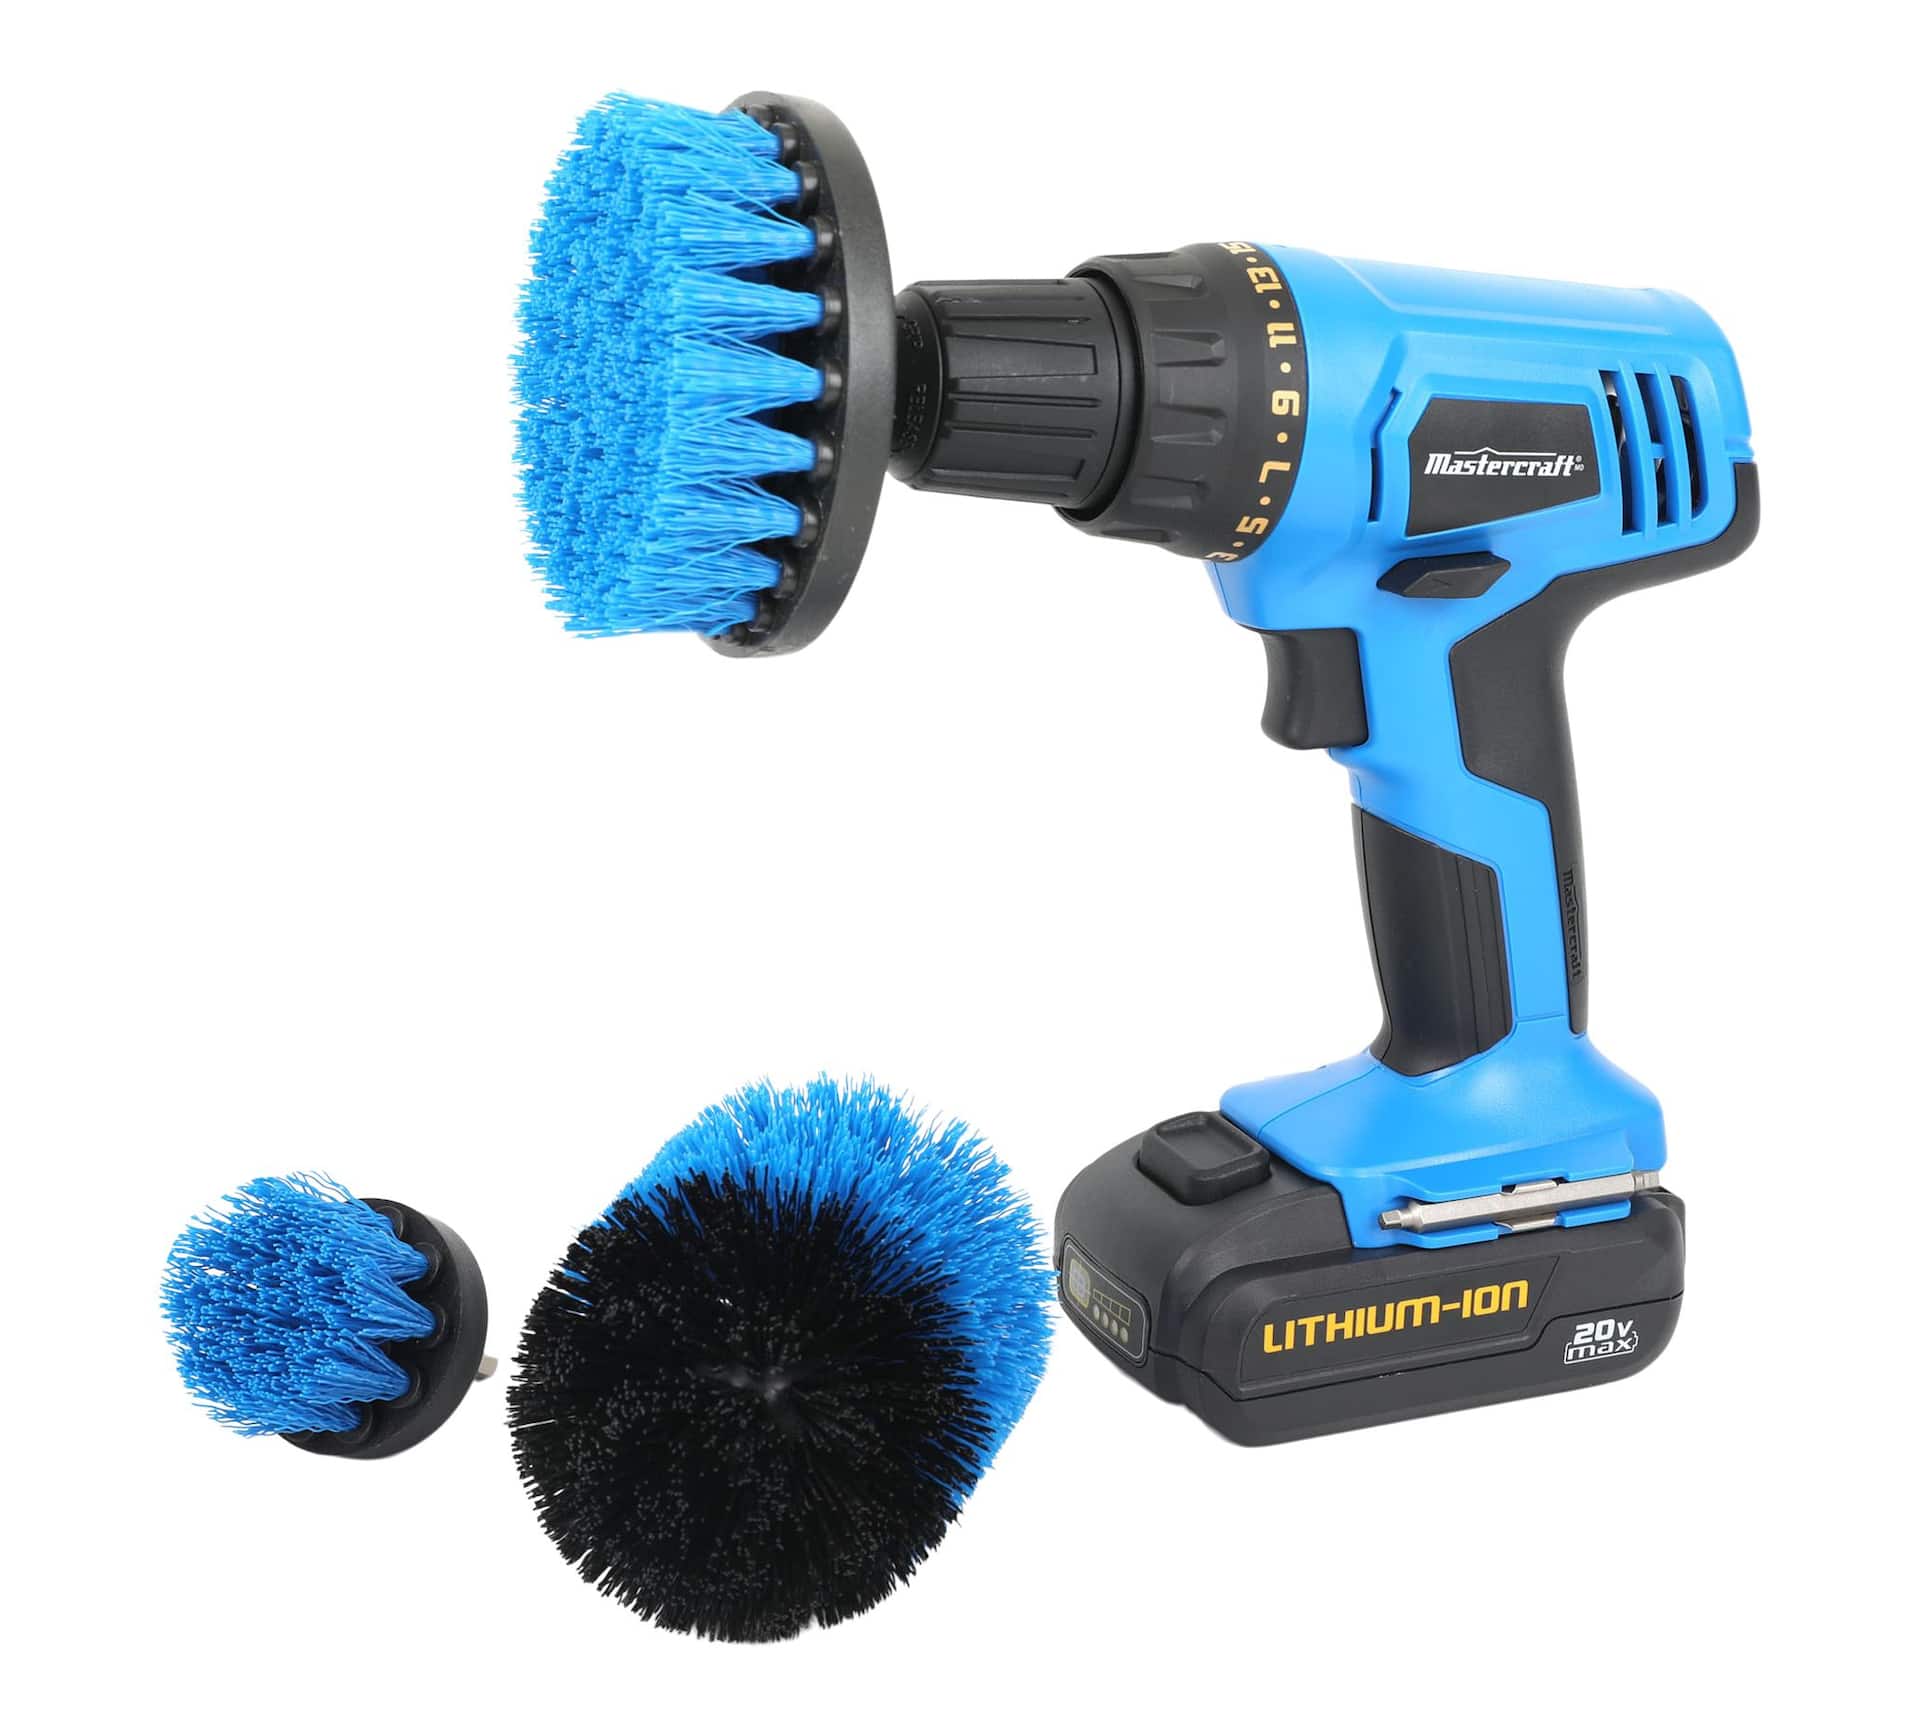 Buy Surface brush with shank online